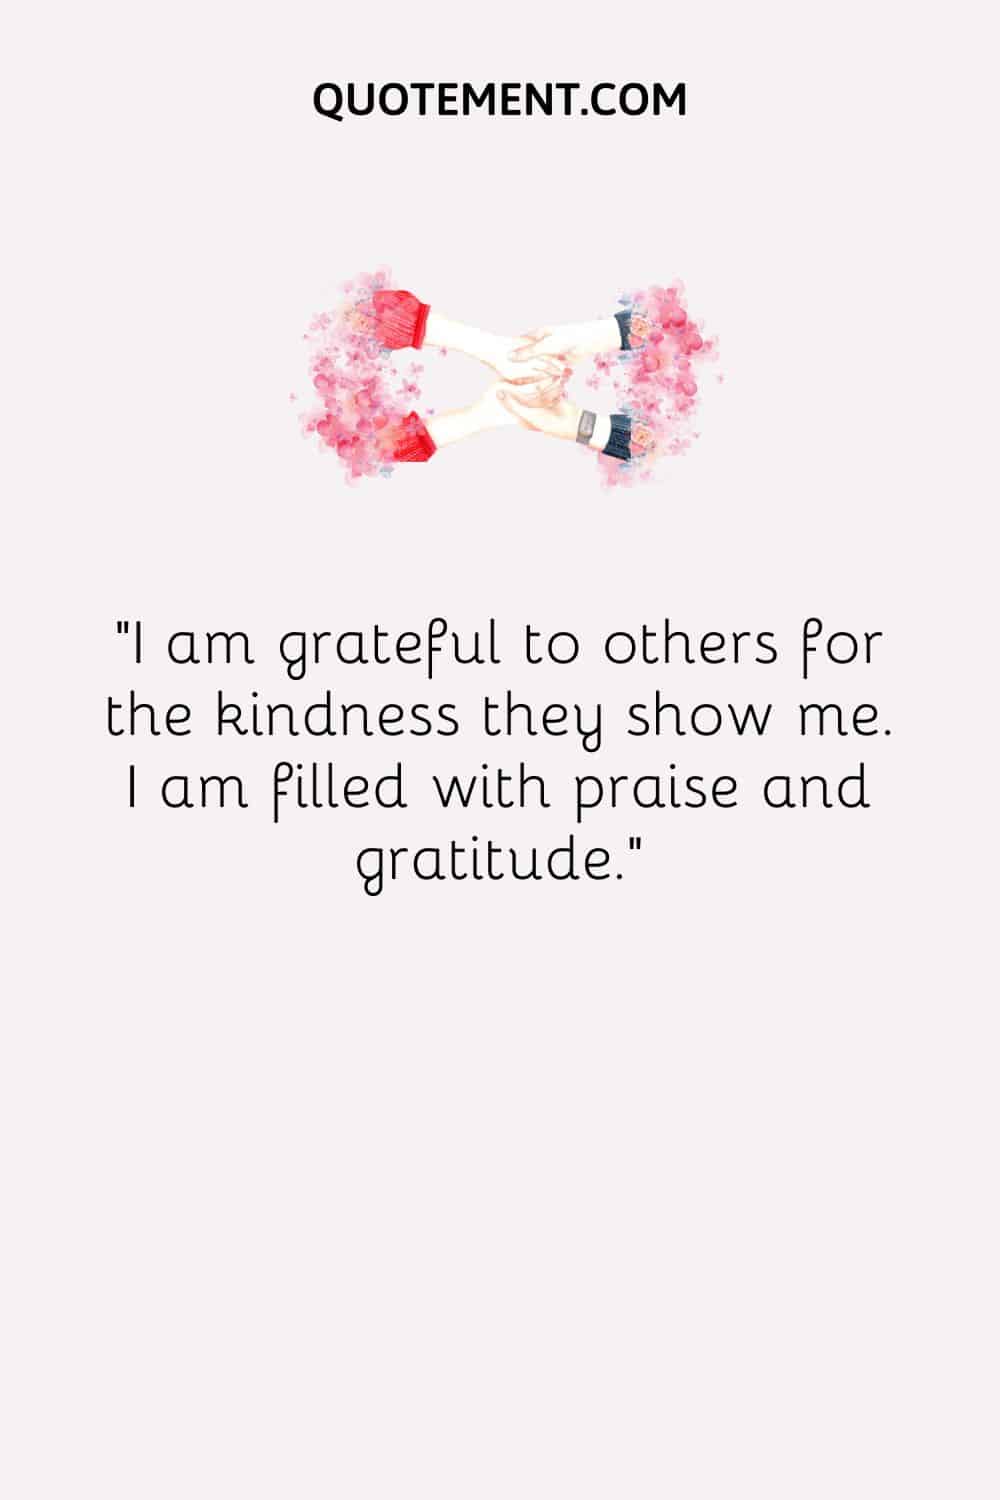 I am grateful to others for the kindness they show me. I am filled with praise and gratitude.